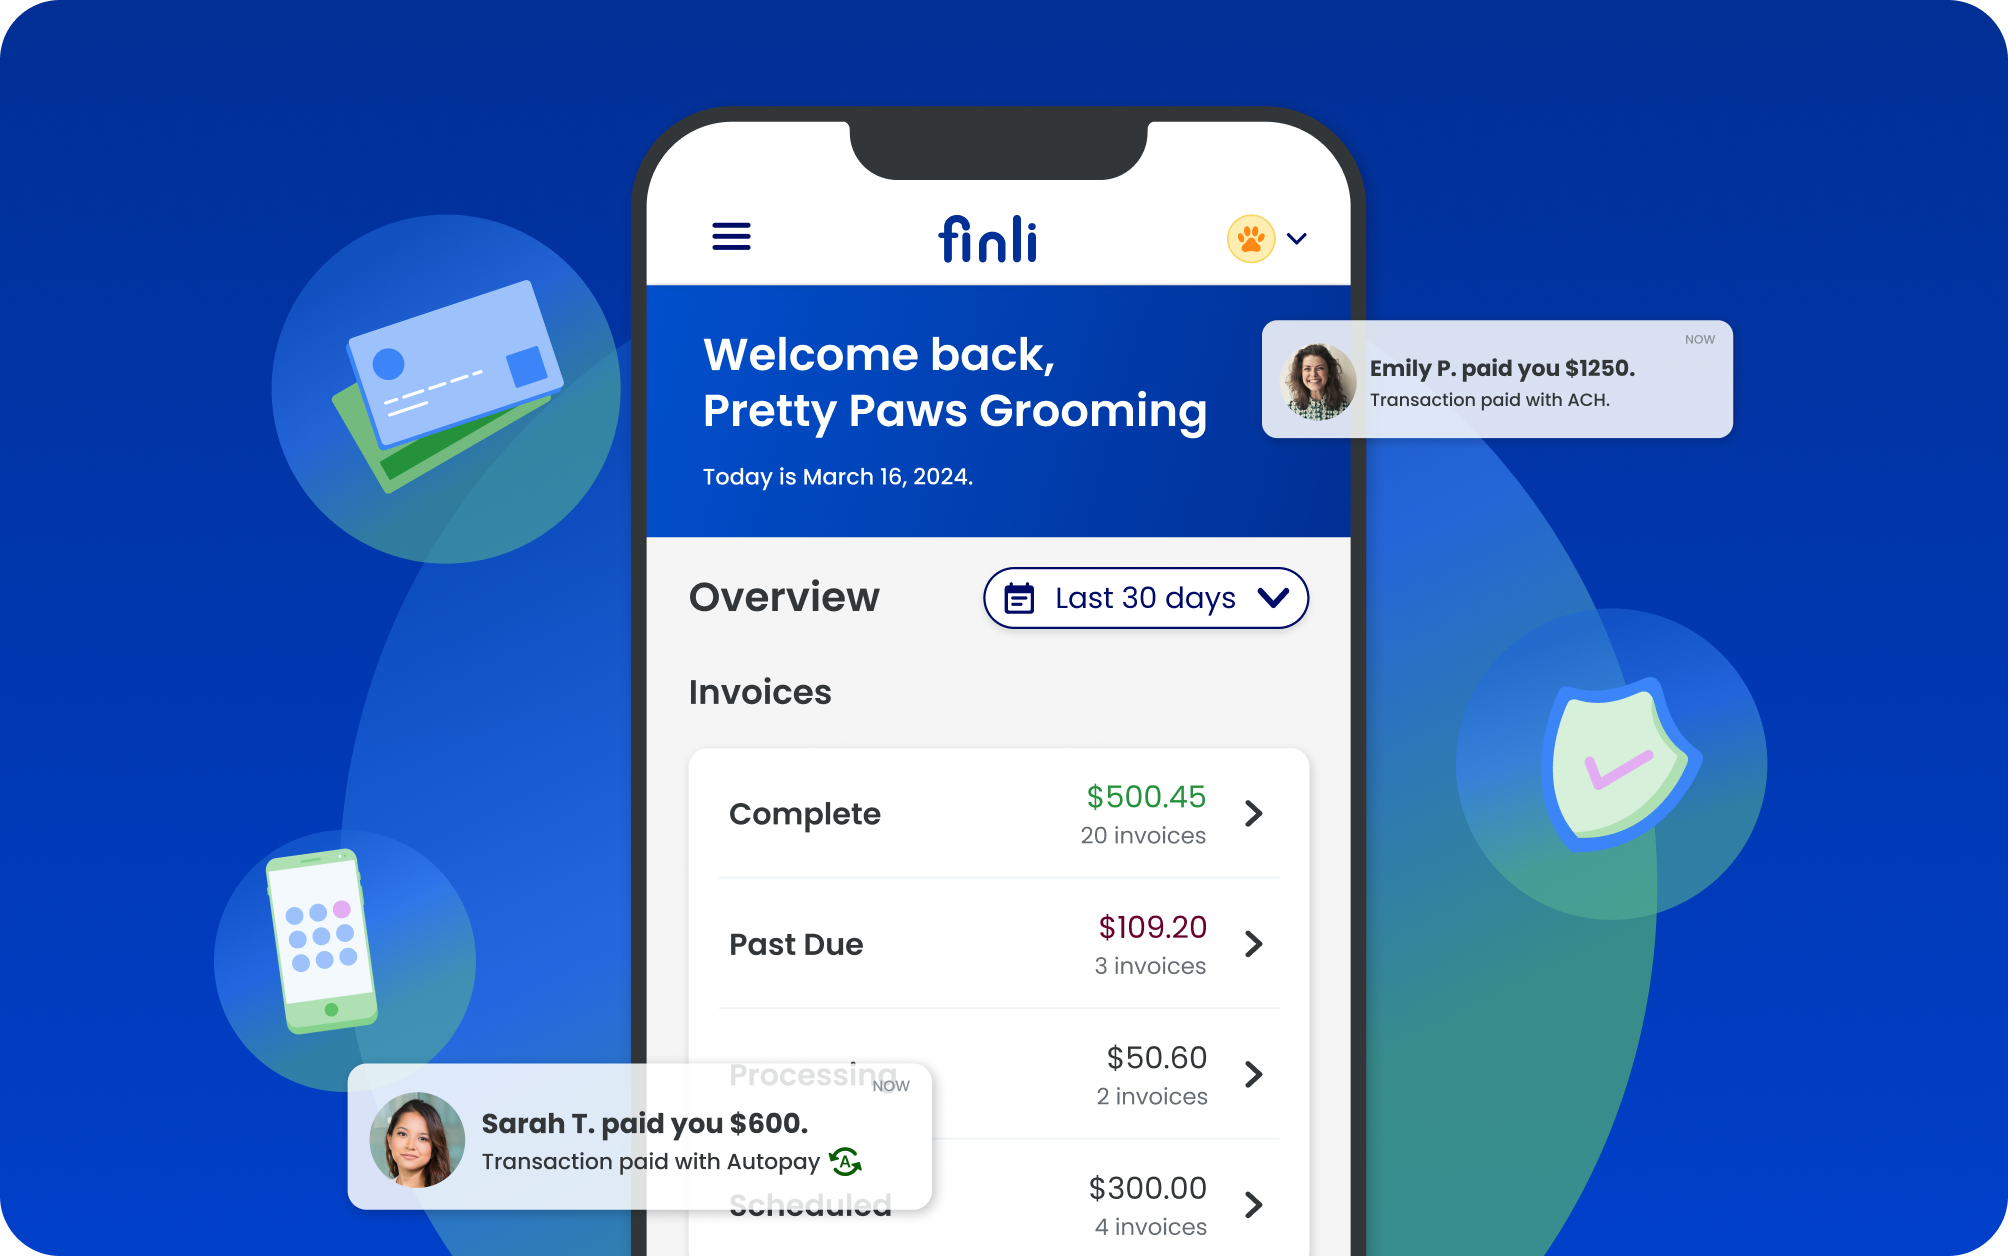 Finli's mobile application allows you to create quotes and invoices, collect payments, manage your customers, and run your business on the go. Available on the App Store and Google Play.